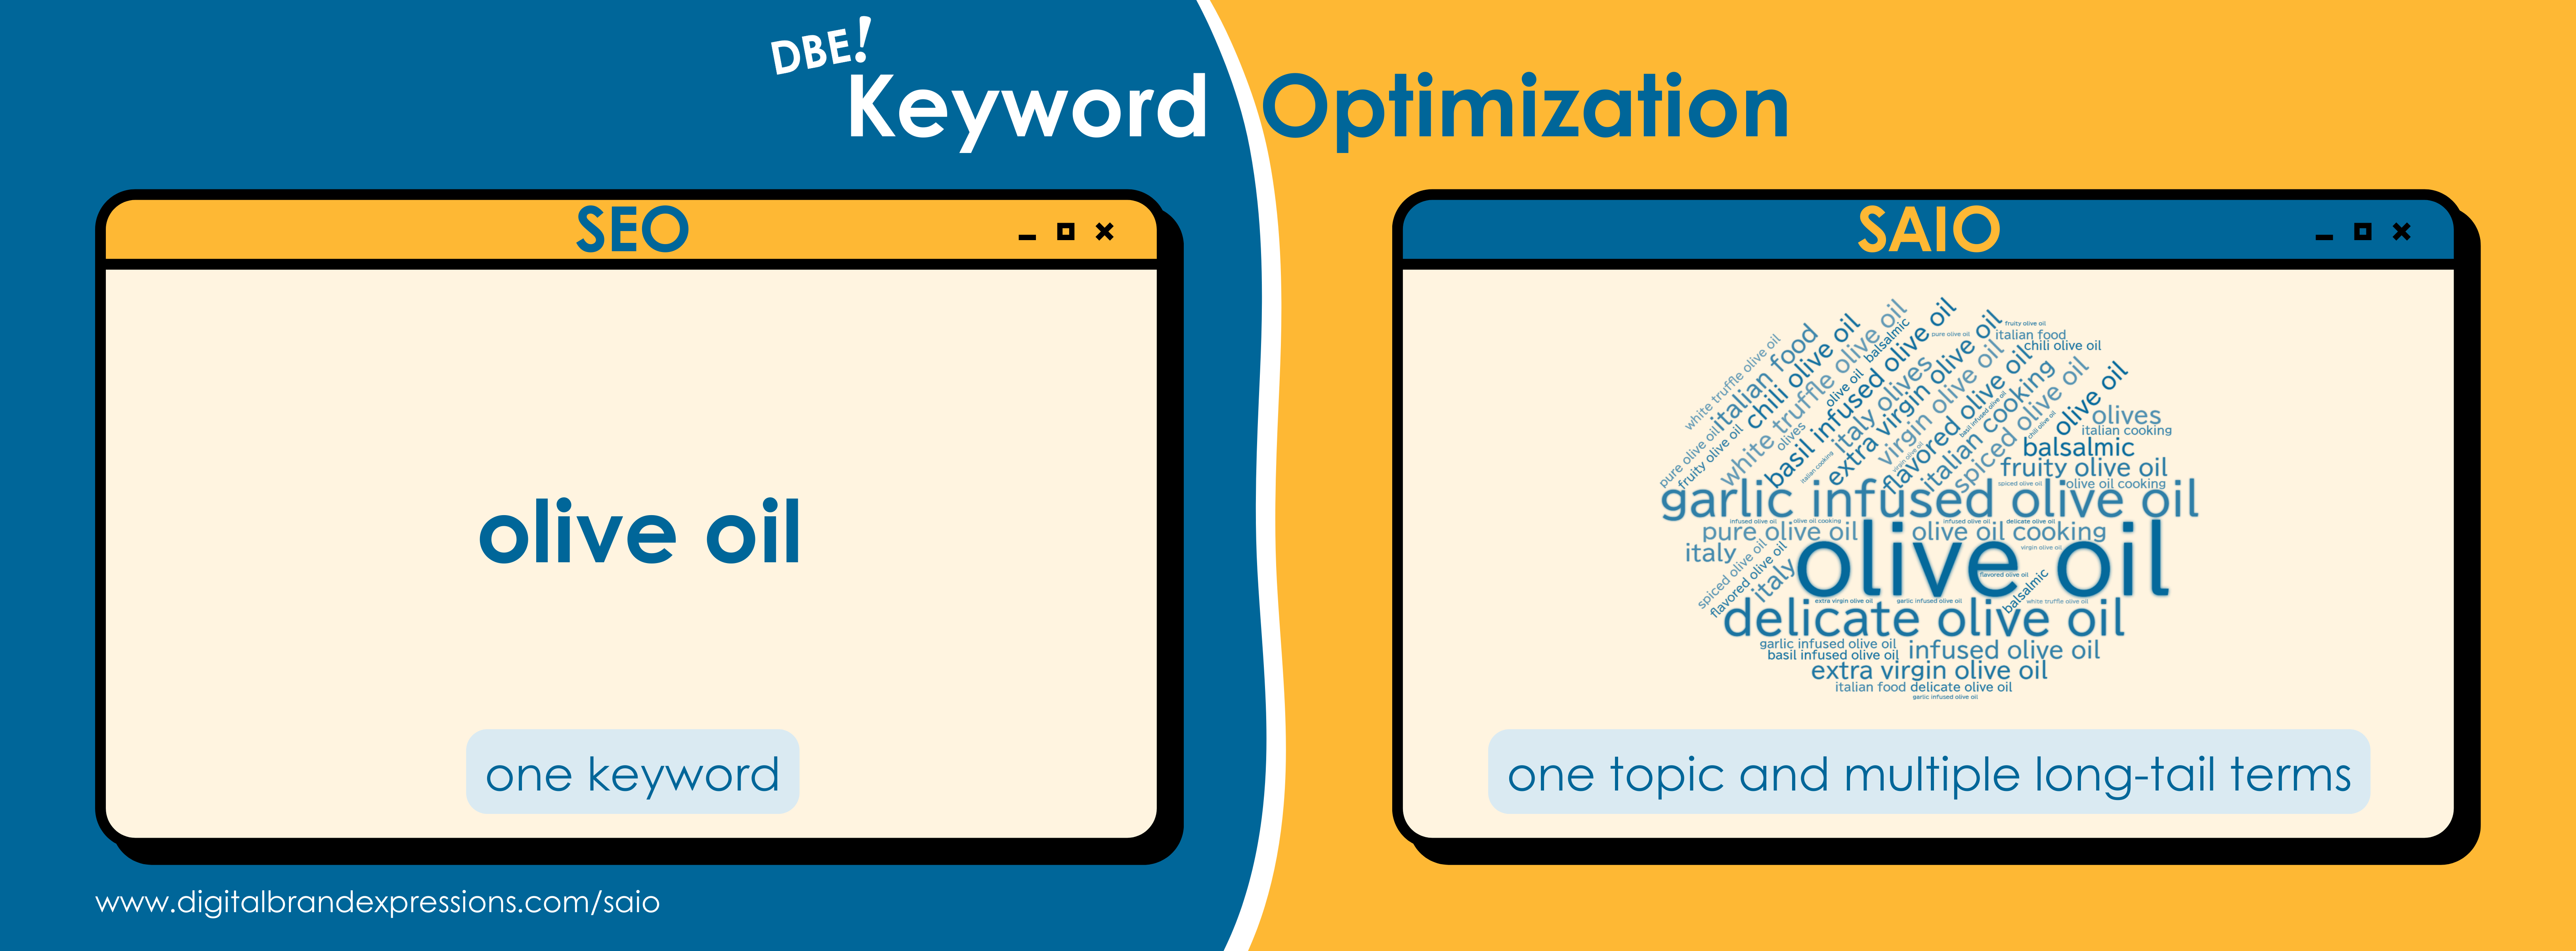 Long landscape image. Title is "DBE Keyword Optimization". On the left, there is "SEO" with "one keyword per page". On the right, there is "SAIO" with "one topic and multiple long-tail search terms".